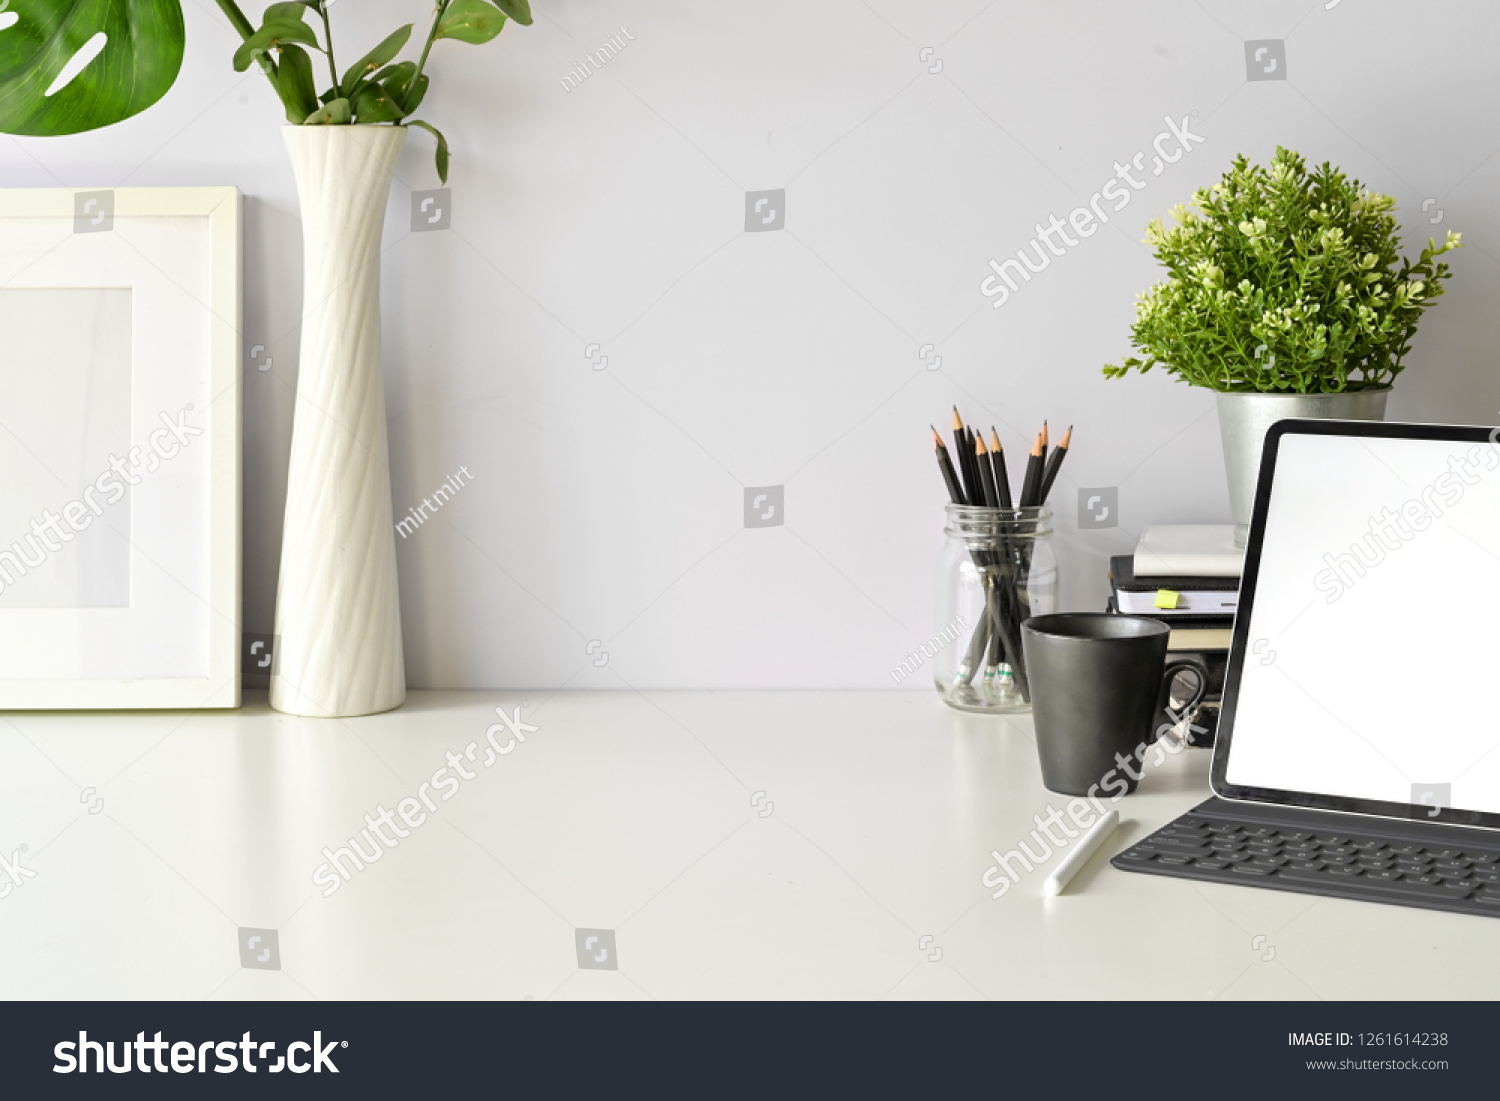 Office desk top table with office supplies, workspace and copy space #1261614238